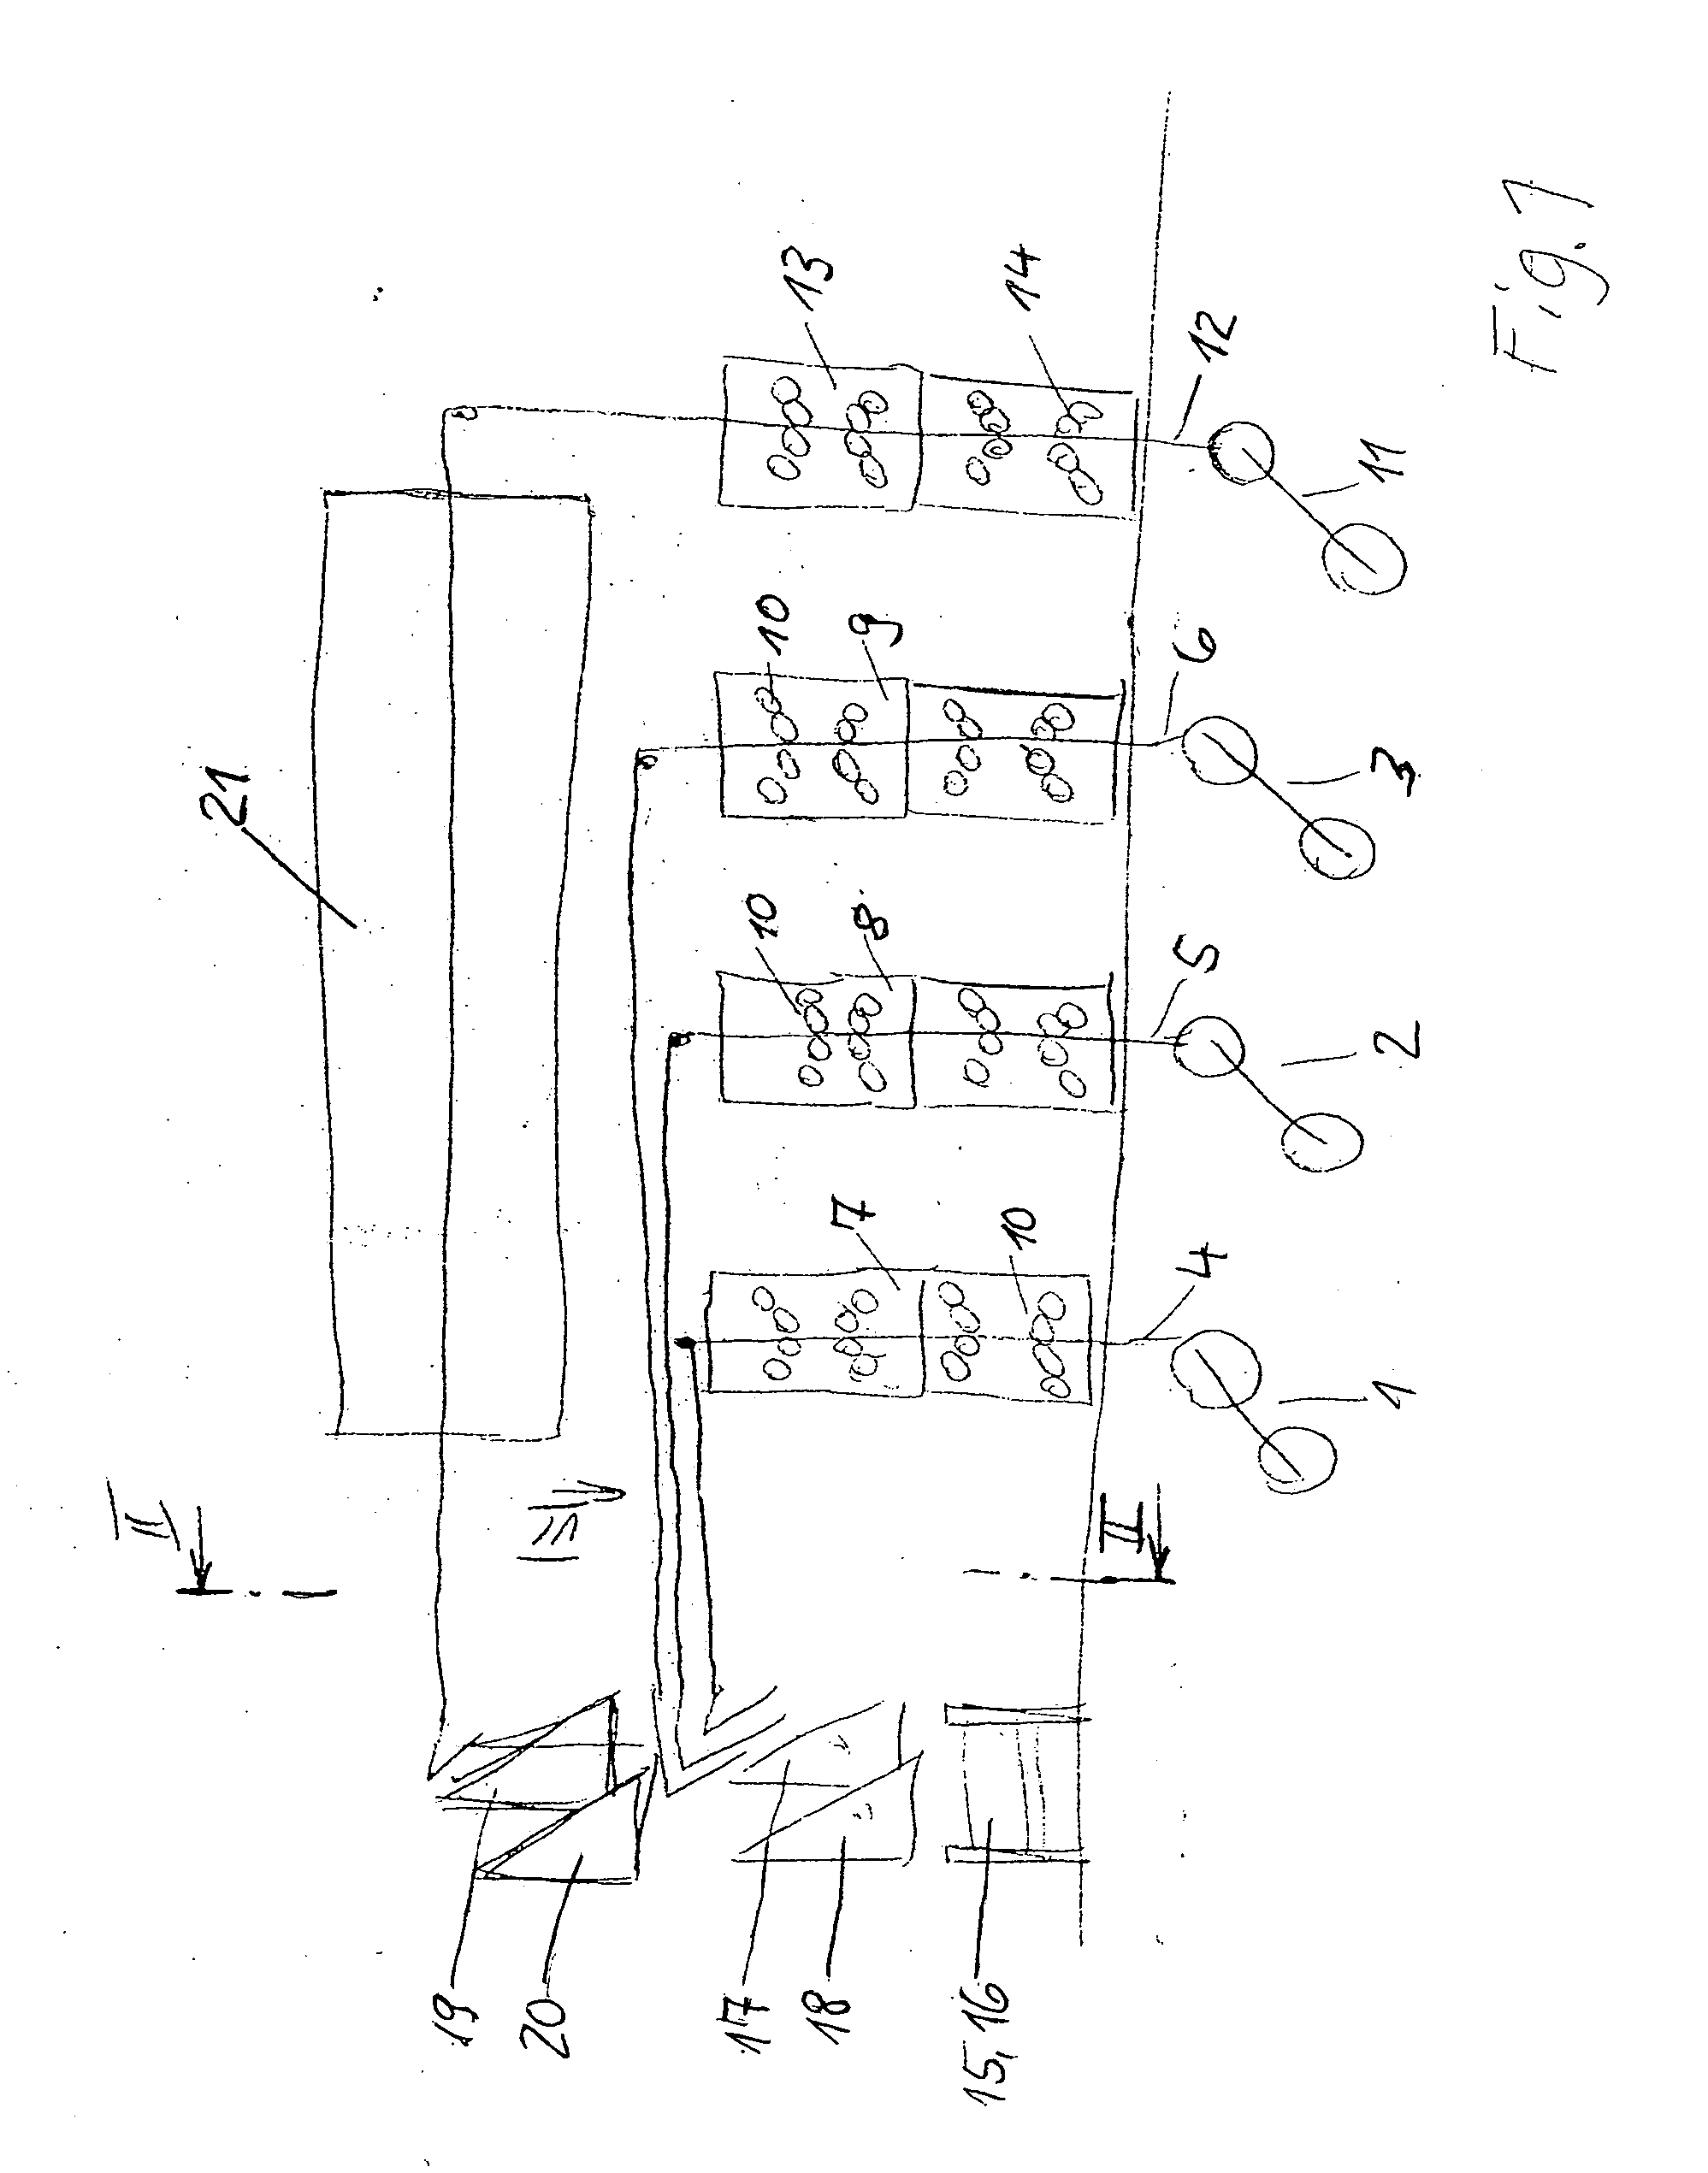 Printing press and method for the production of newspapers